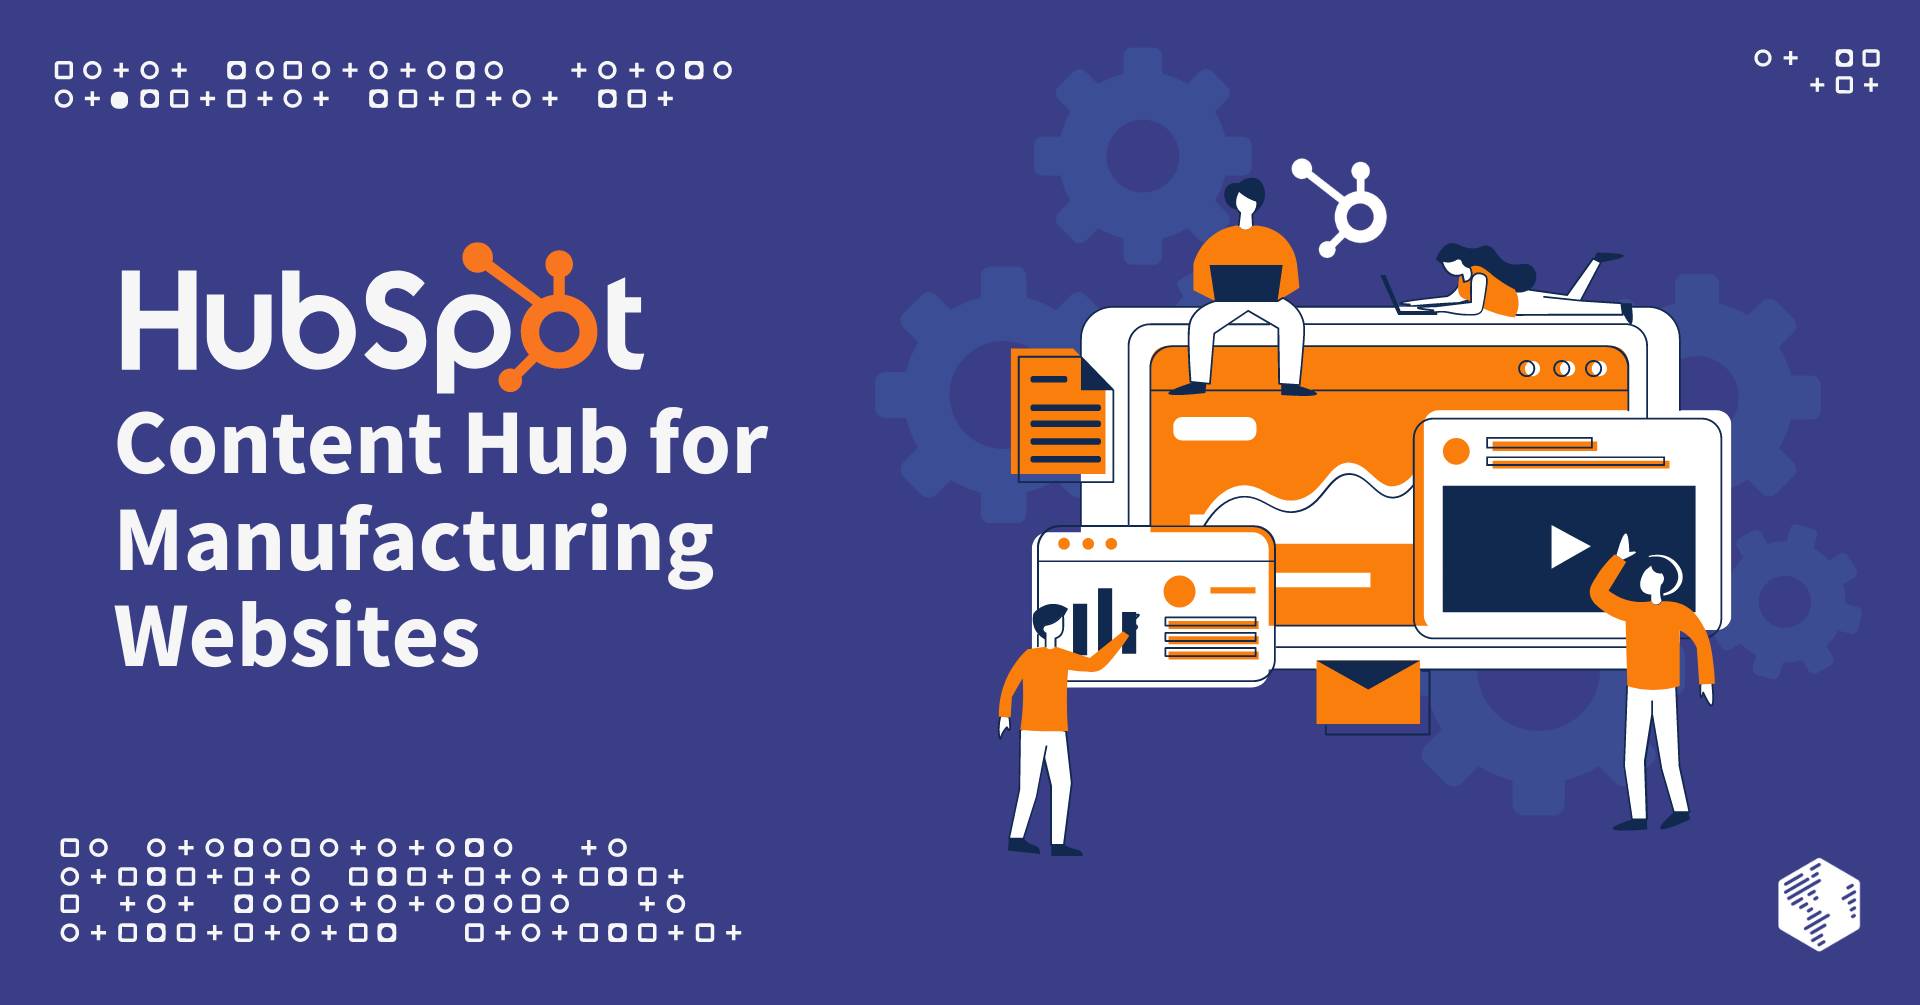 How To Use HubSpot Content Hub for Manufacturing Websites